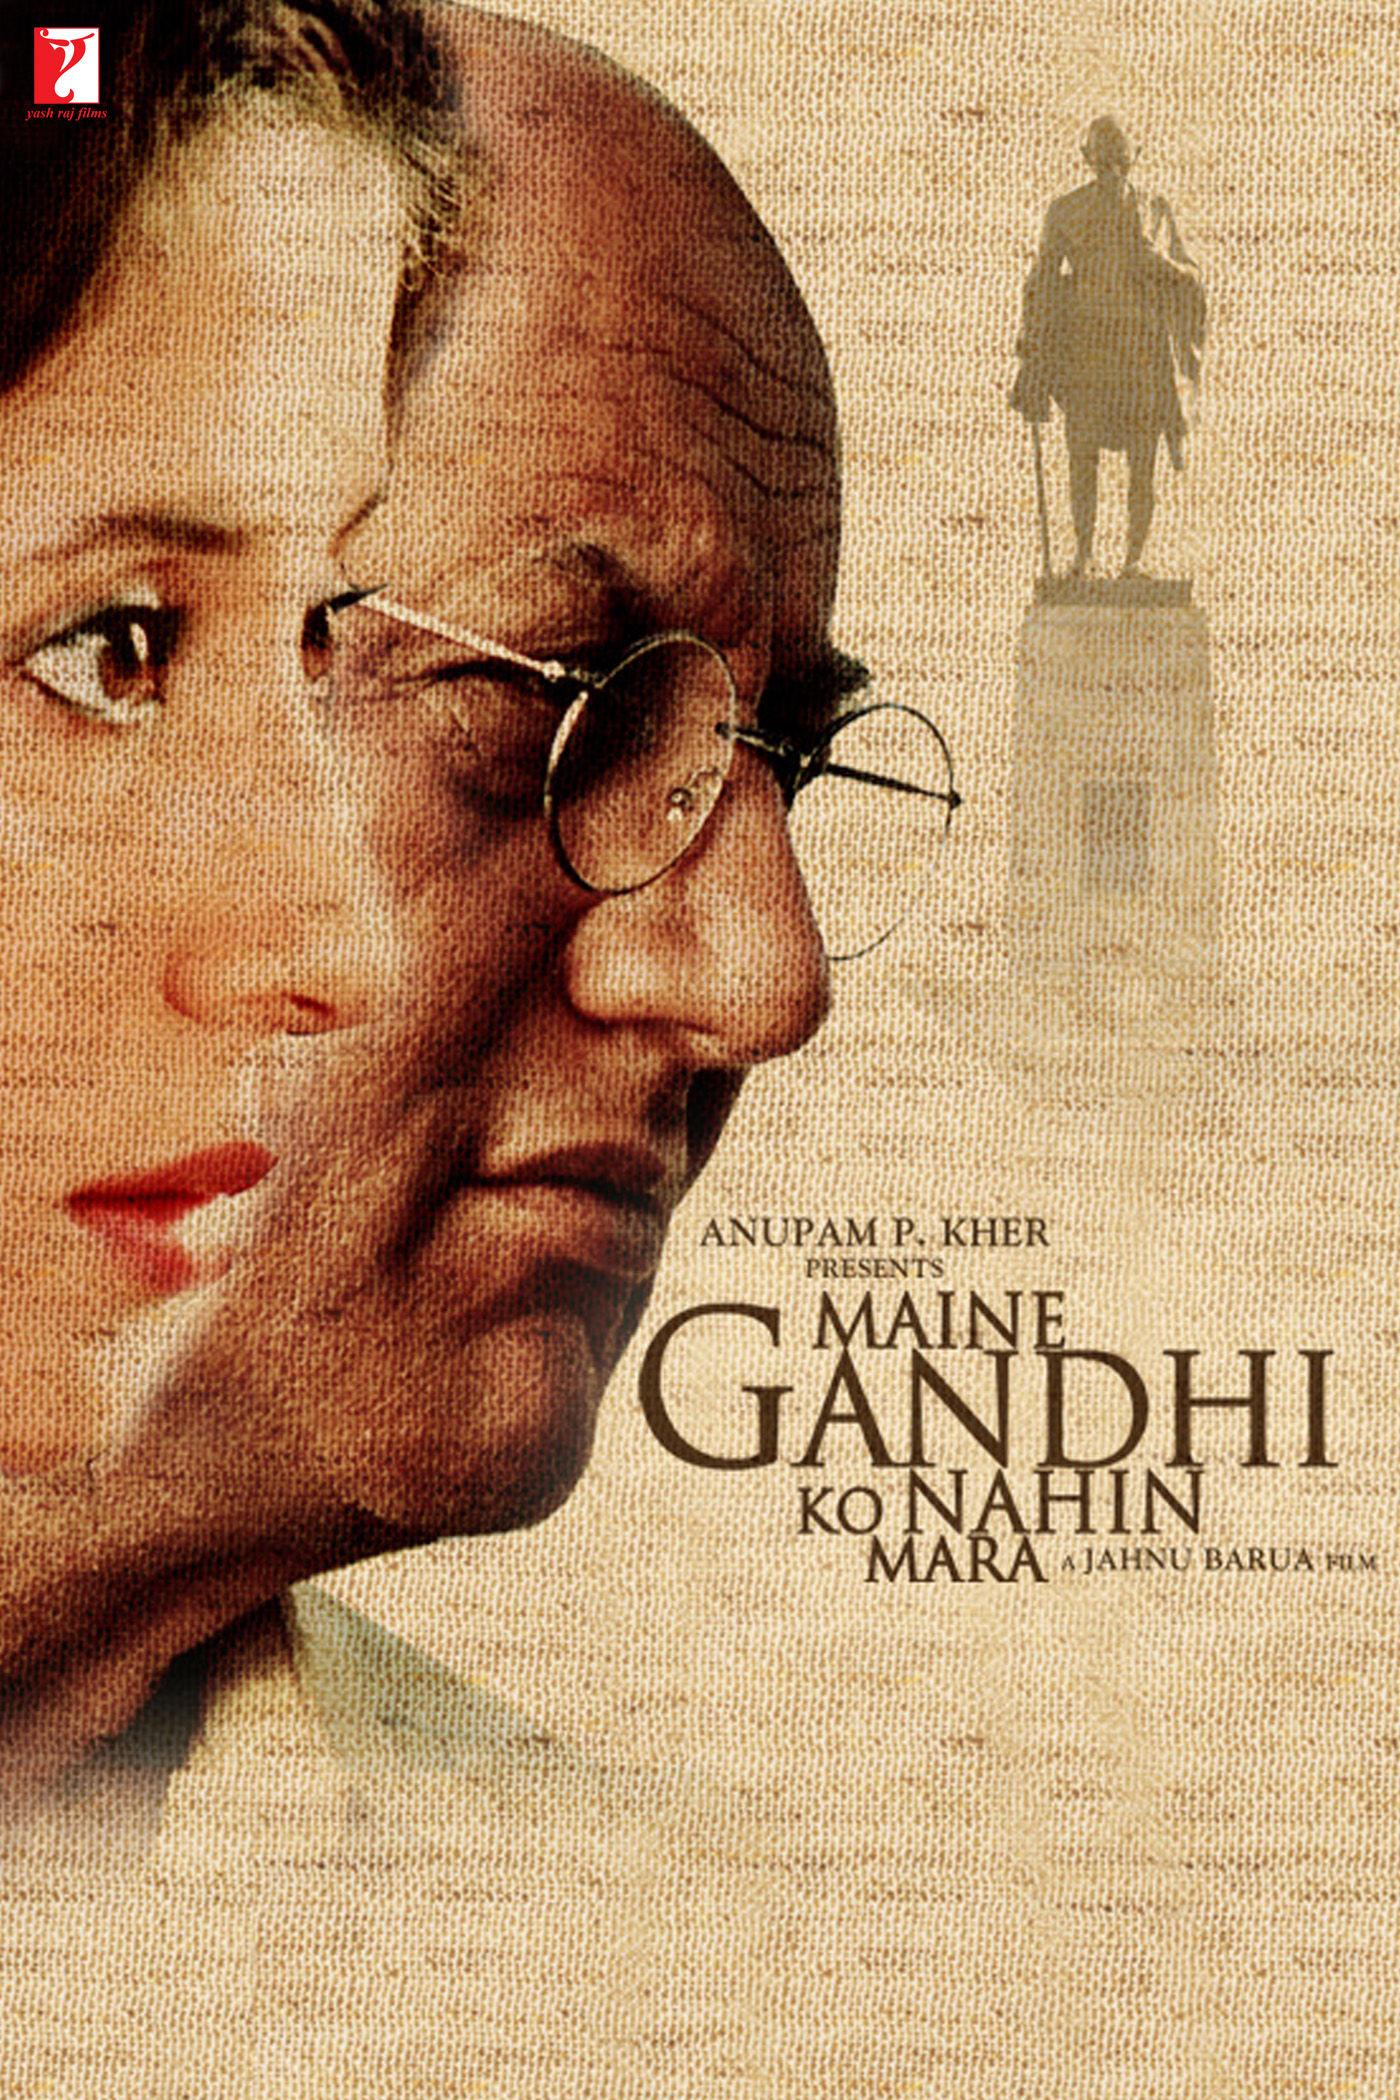 Maine Gandhi Ko Nahin Mara (2005)In this psychological drama, Anupam Kher plays a retired Hindi professor suffering from dementia, who believes he was accused of assassinating Mahatma Gandhi. The film explores the professor's mental health issues and his daughter's efforts to intervene.